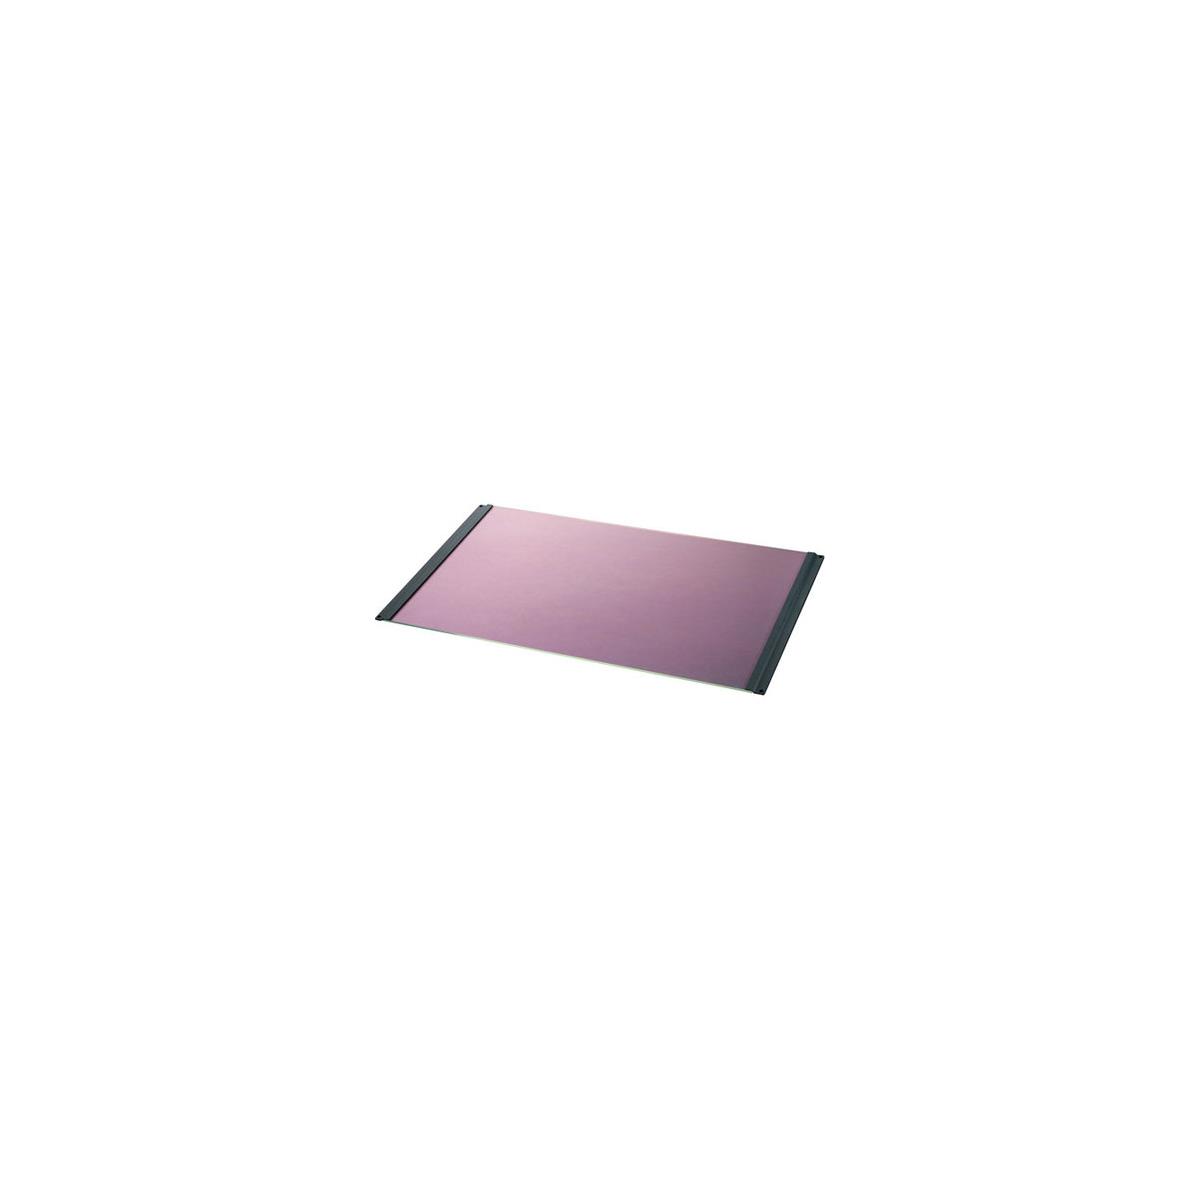 Image of Ikegami PP-1750 LCD Surface Protection Panel for HLM-1750WR Monitor